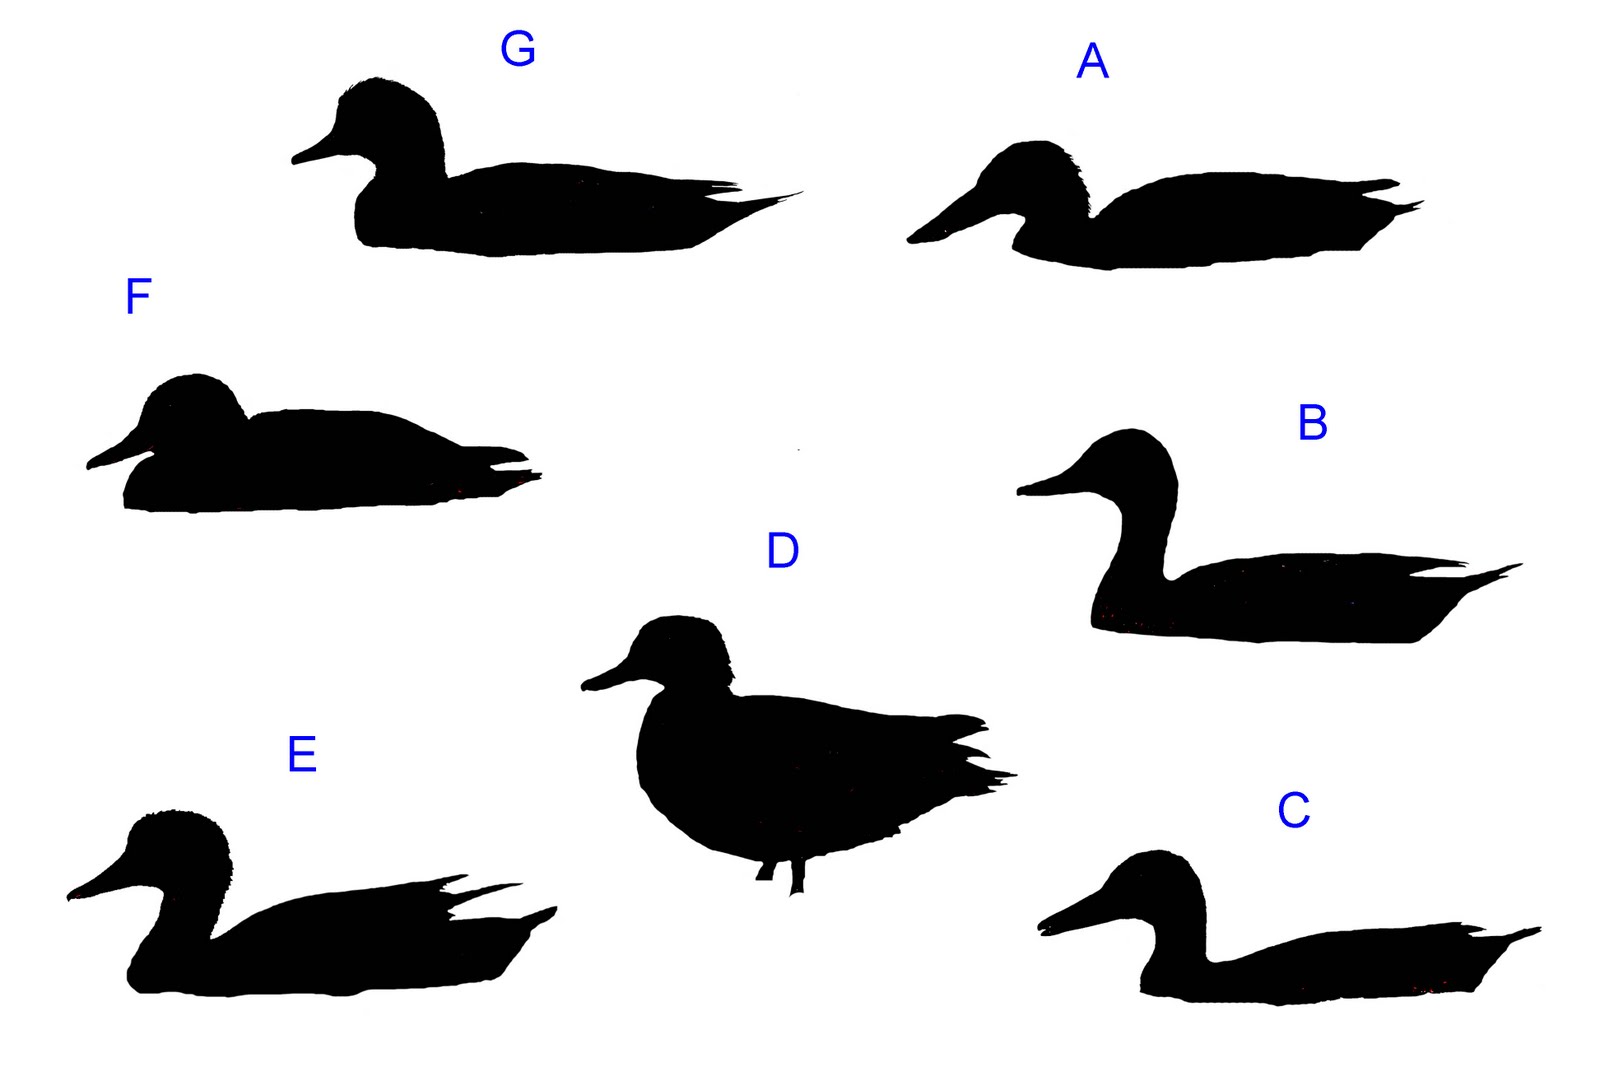 Dabbling duck silhouette quiz: Answers - Pacific NW Birder